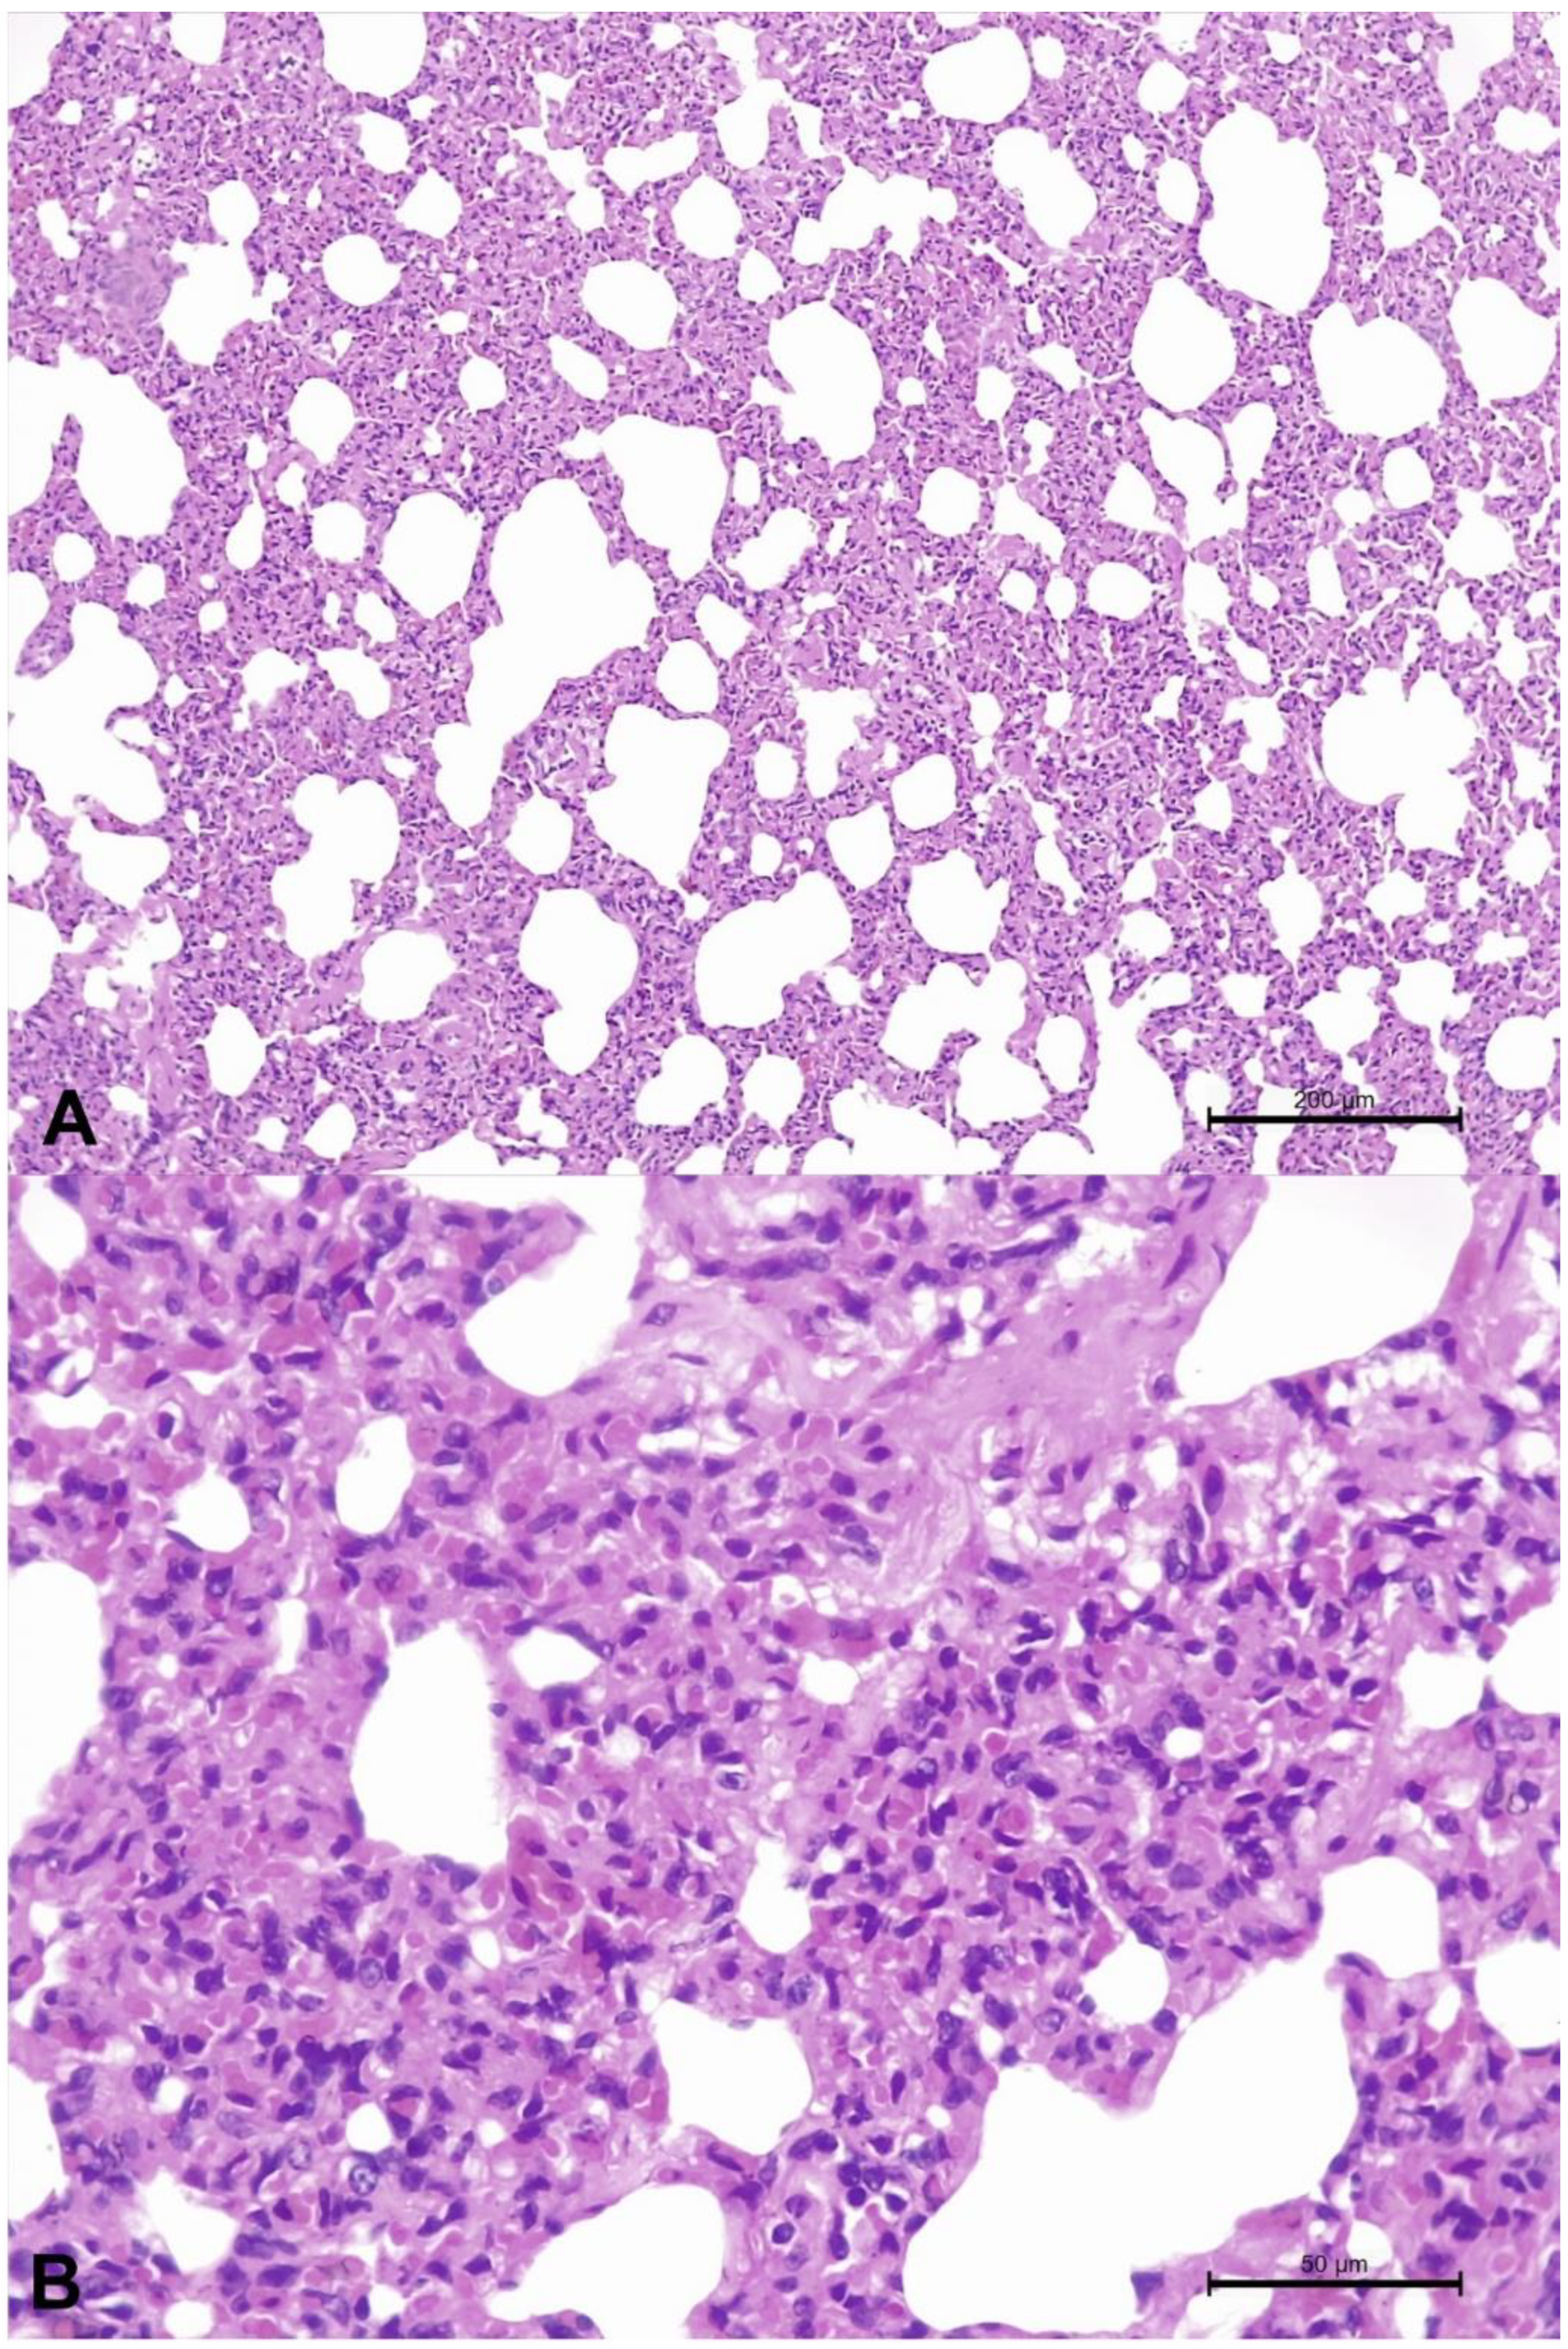 Animals | Free Full-Text | Possible Association of Bovine Gammaherpesvirus  6 with Pulmonary Disease in a Cow